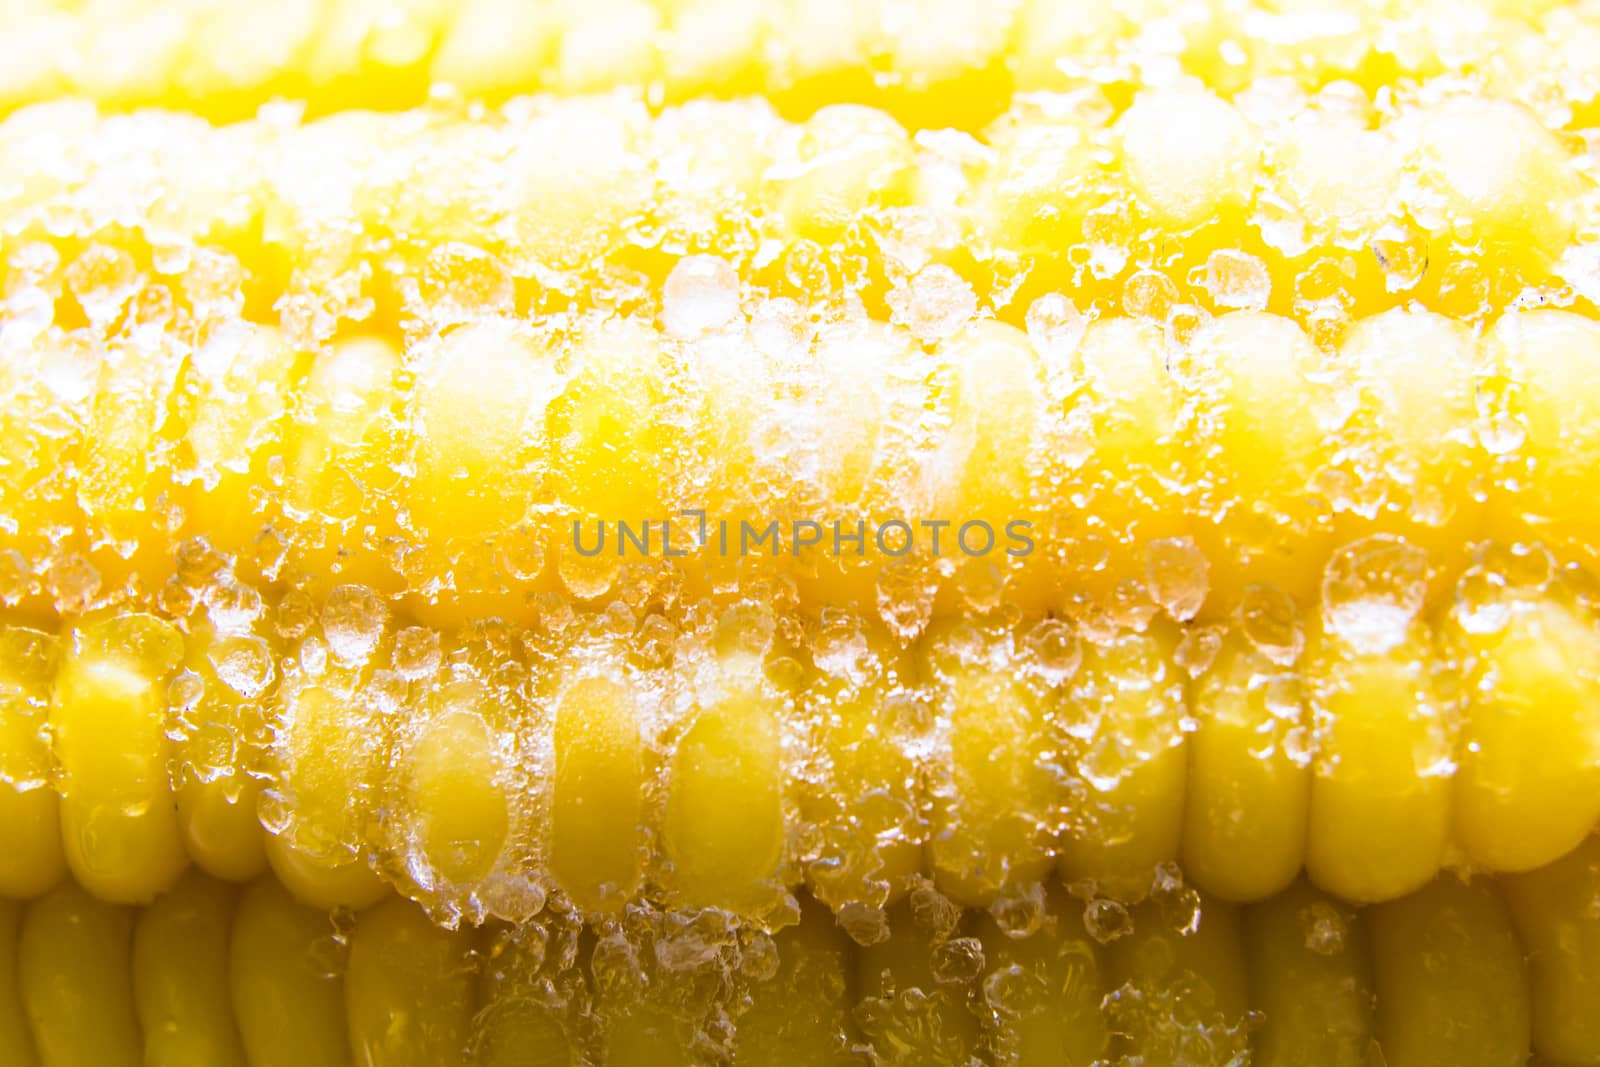 Sweet corn out of the refrigerator.